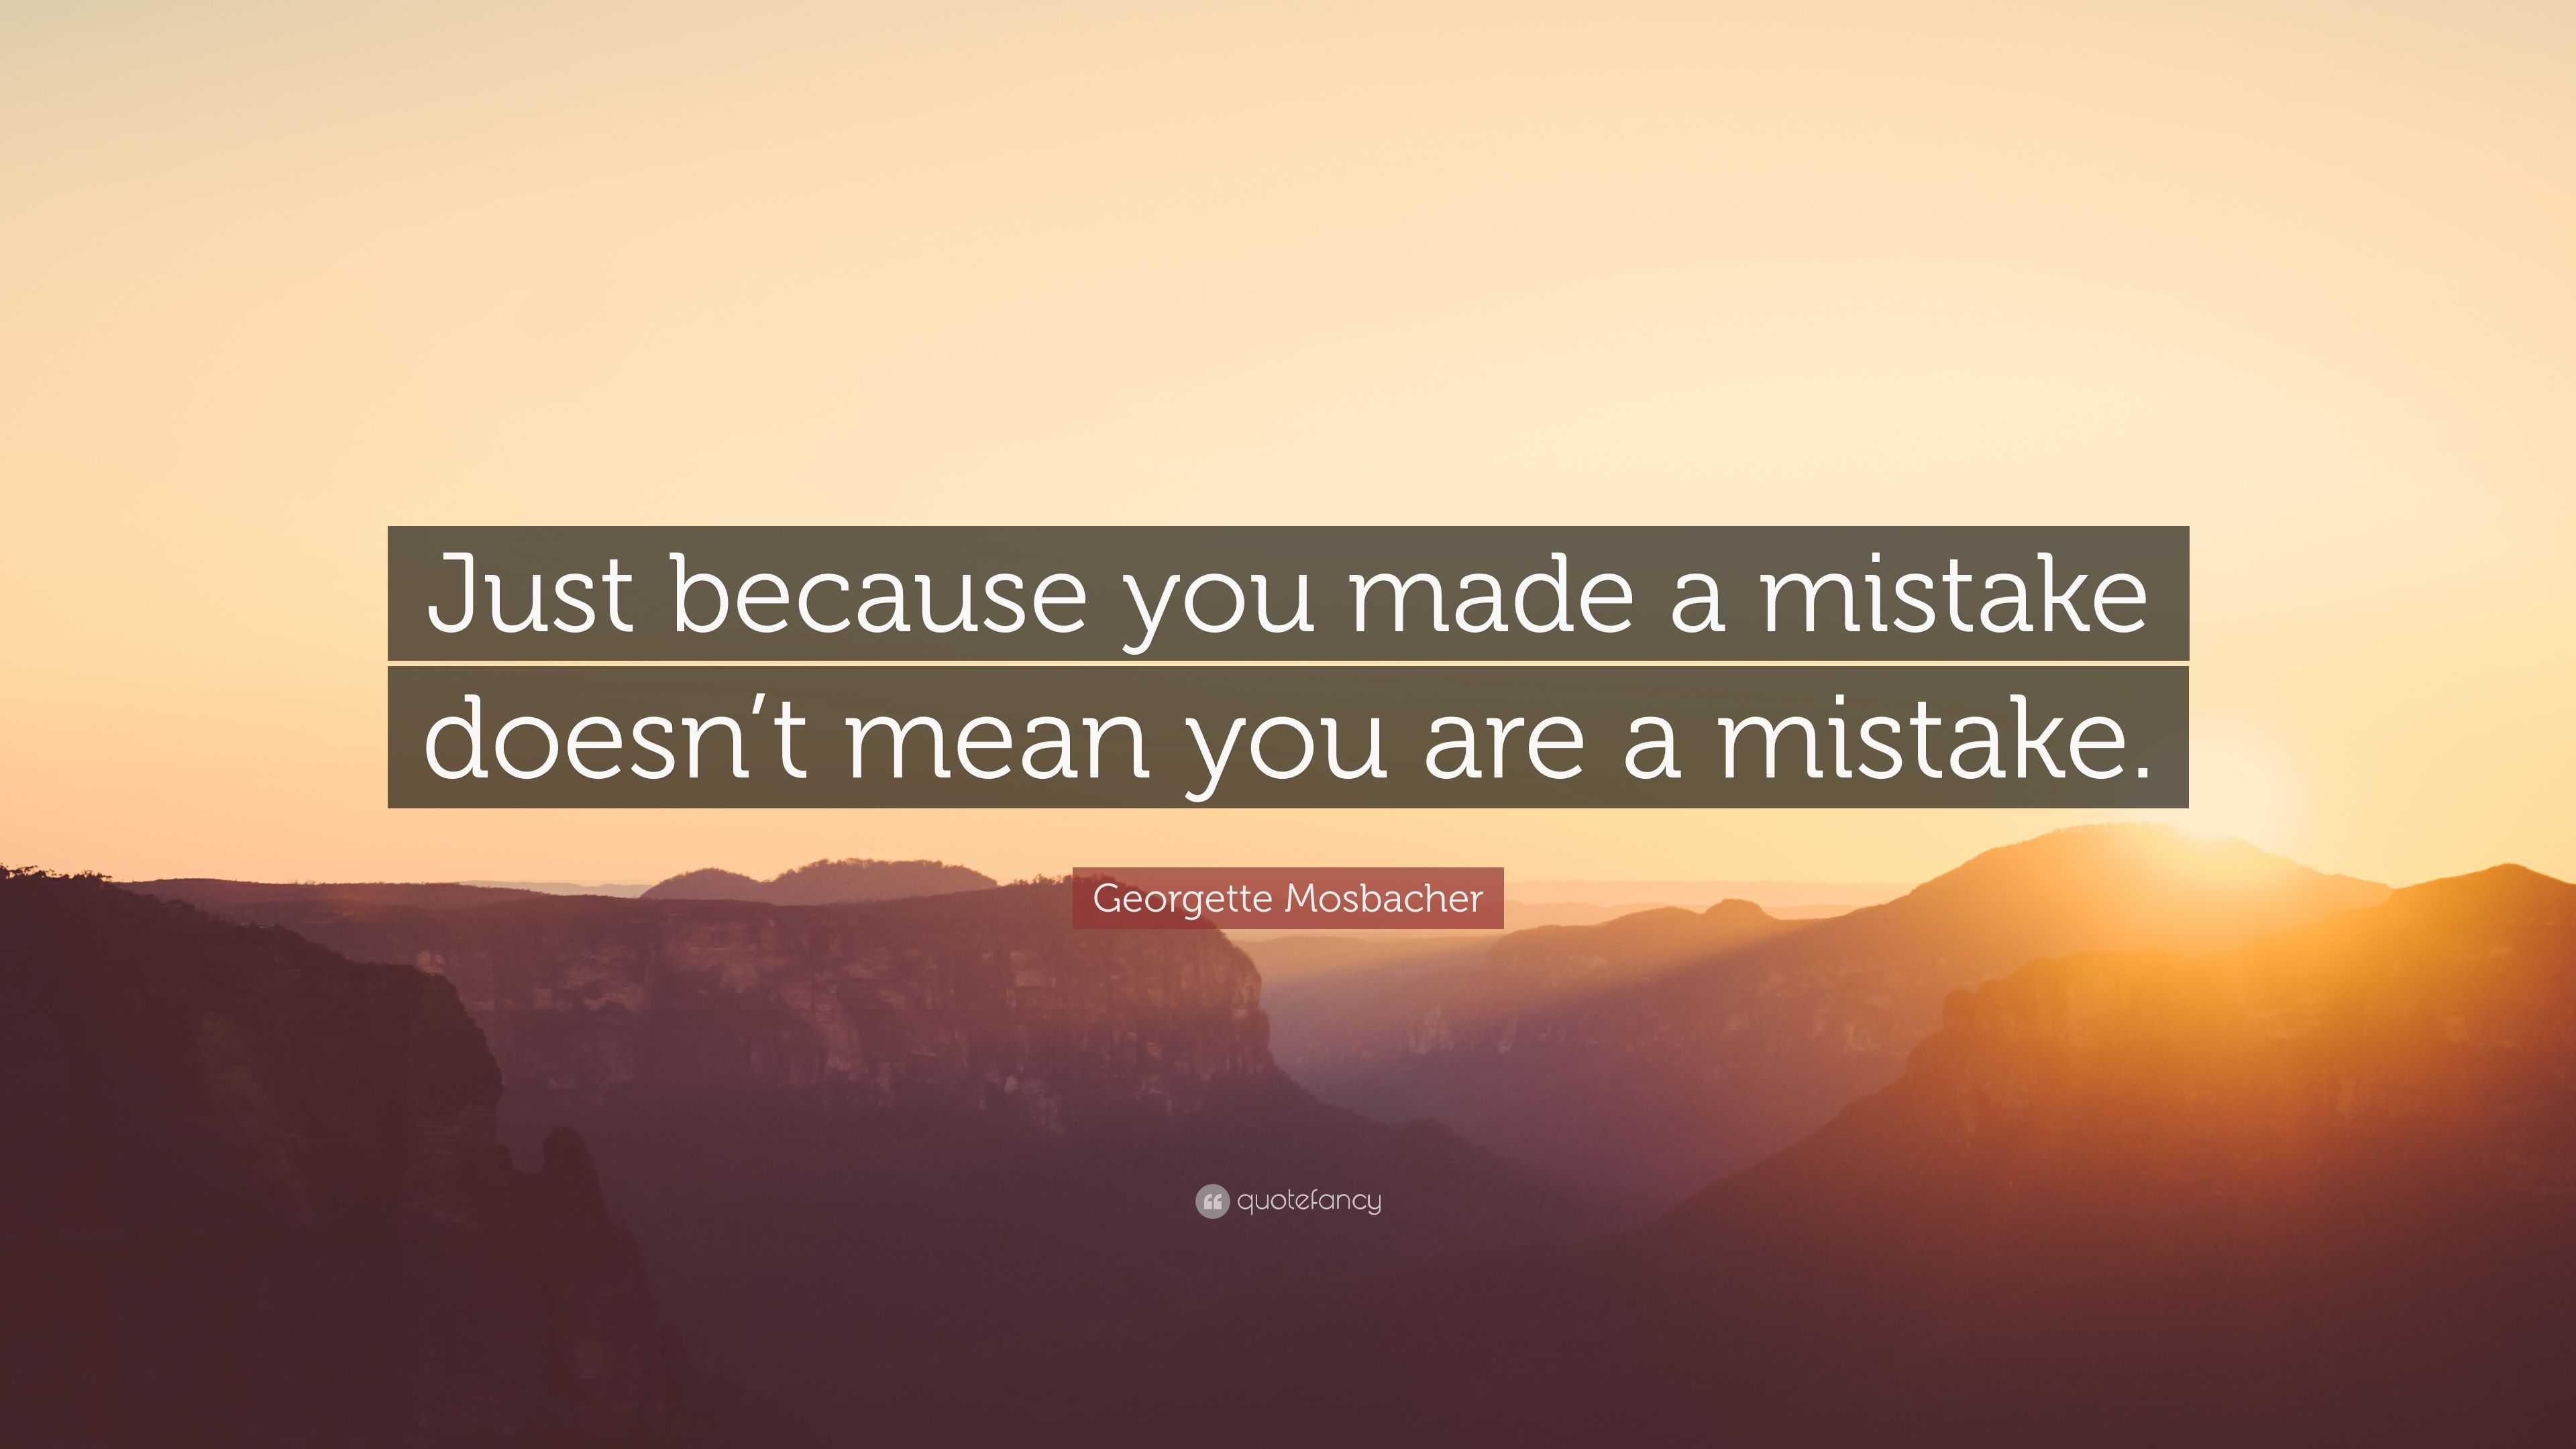 Have You Made This Mistake? 